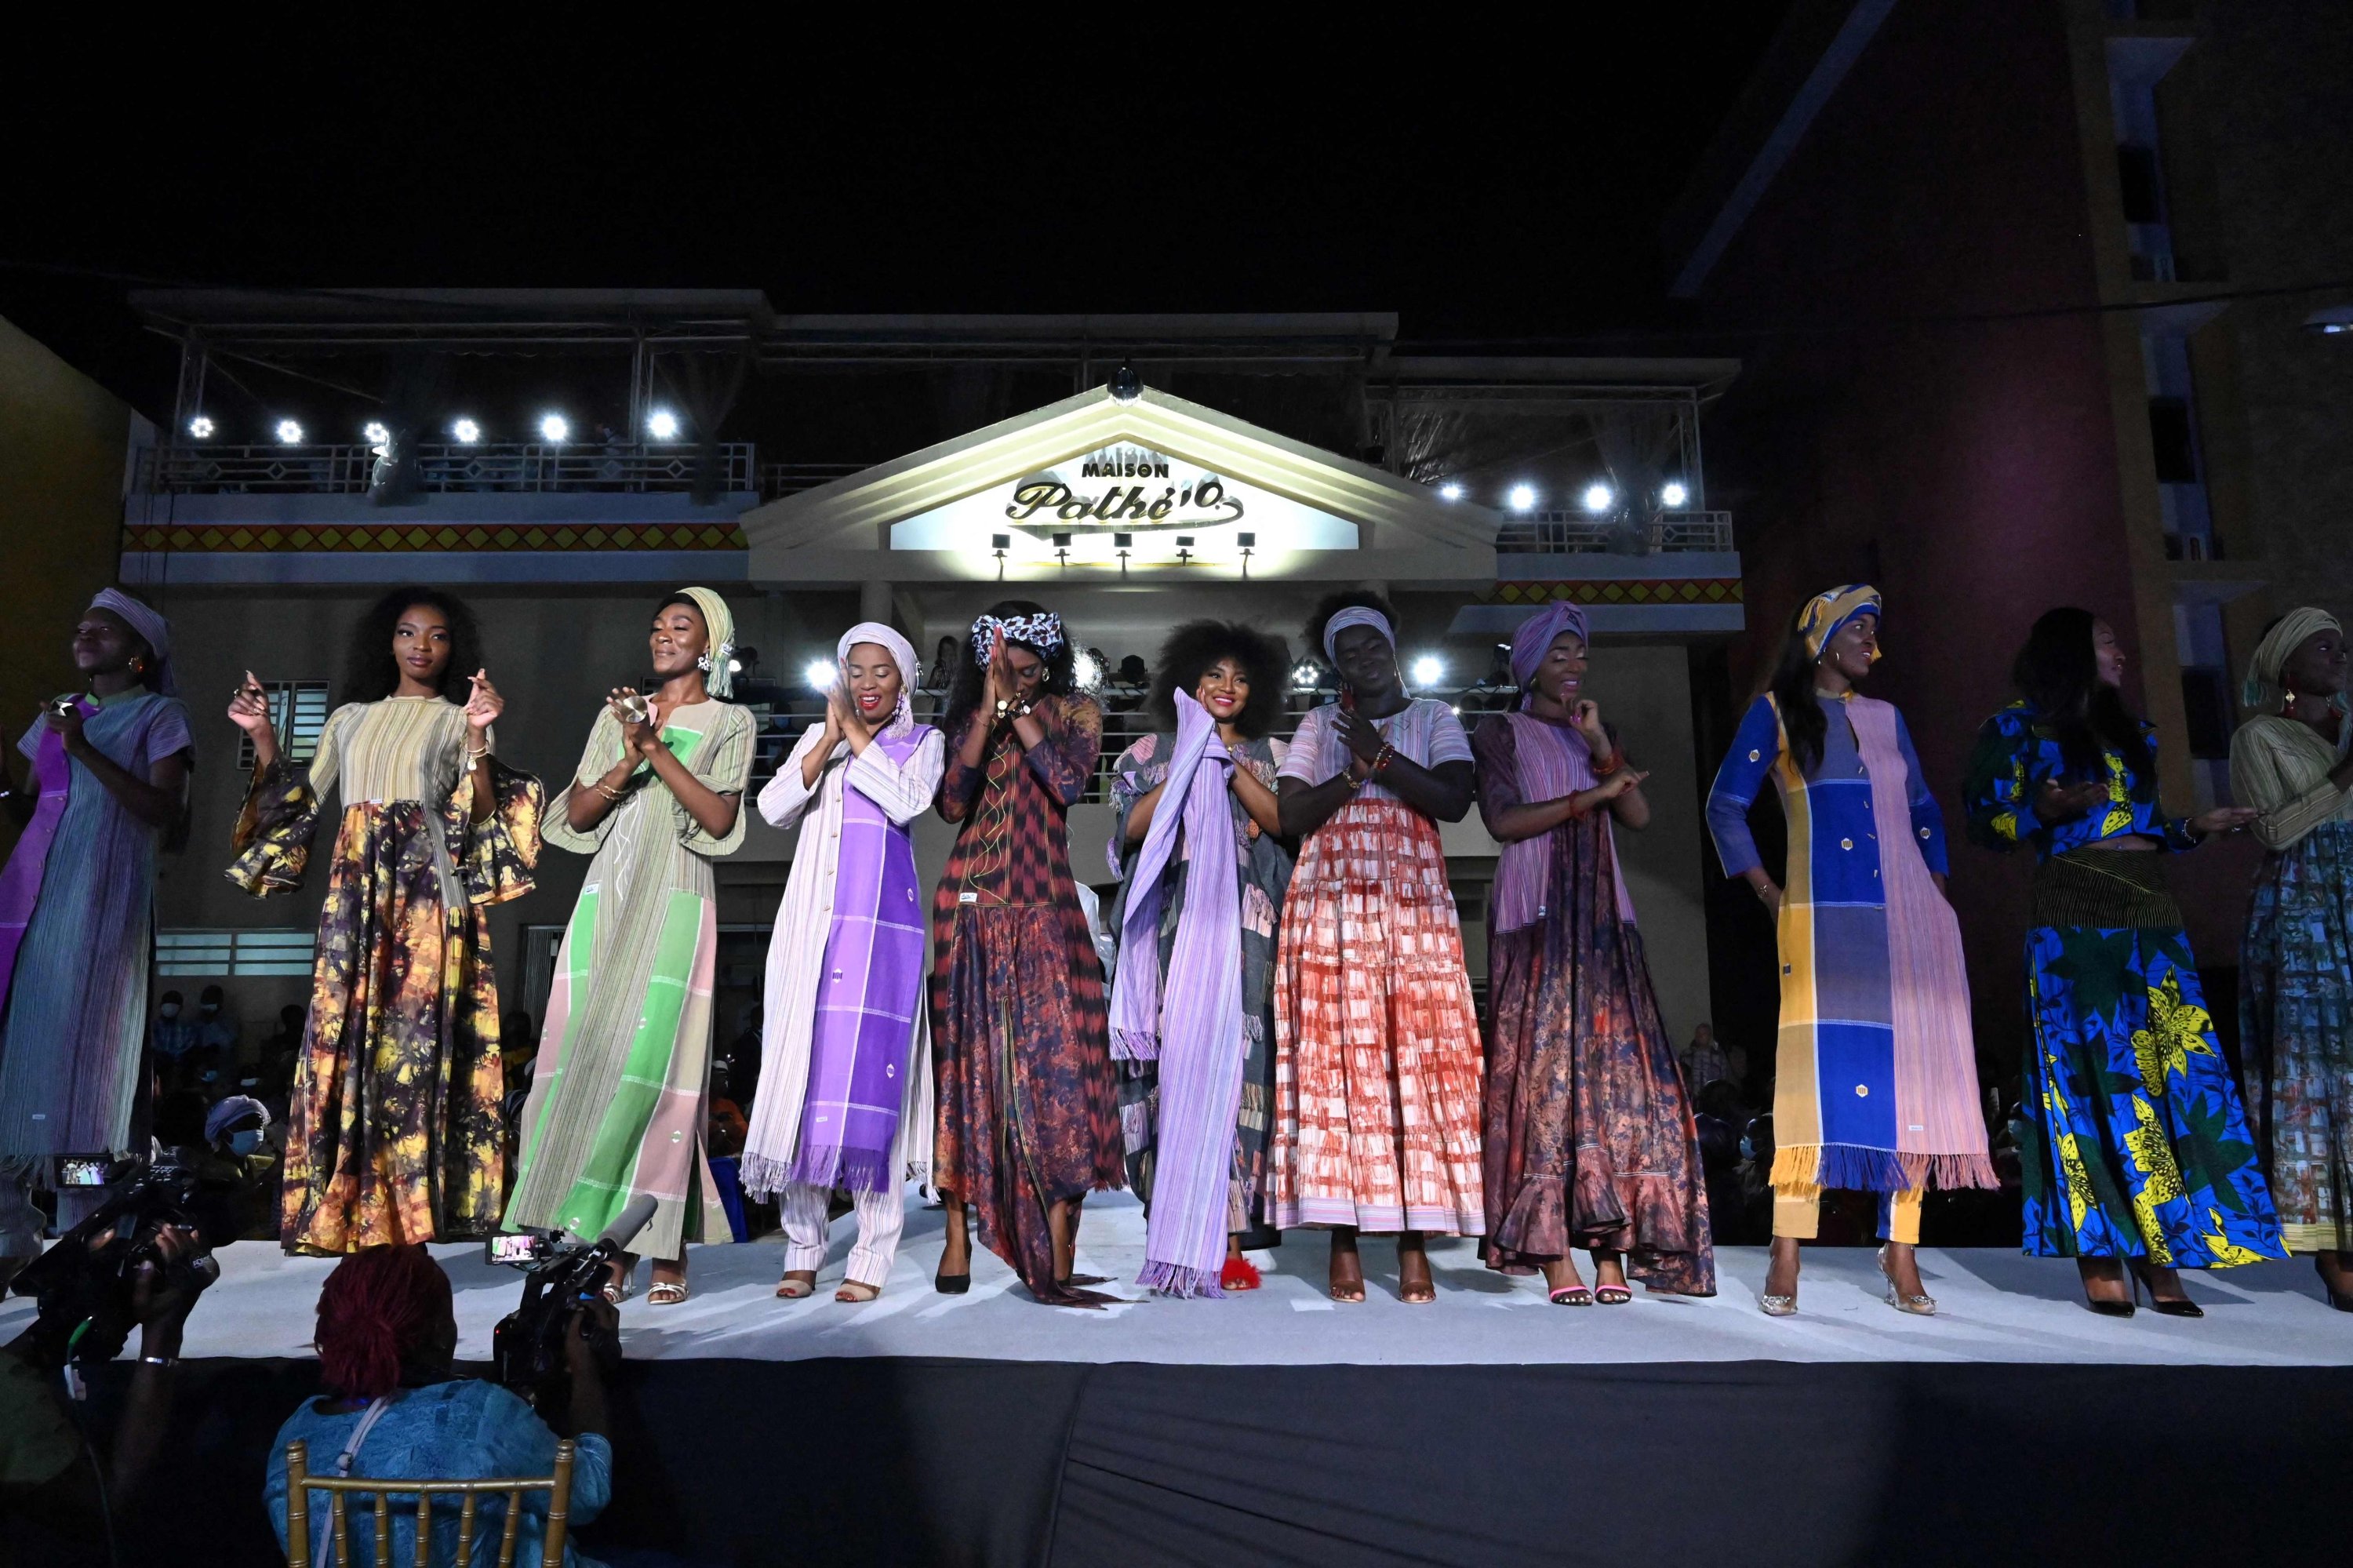 Models present the creations of Pathé'O during a fashion show to celebrate 50 years of 'Maison Pathe'O' in Abidjan, Ivory Coast, May 29, 2021. (AFP Photo)